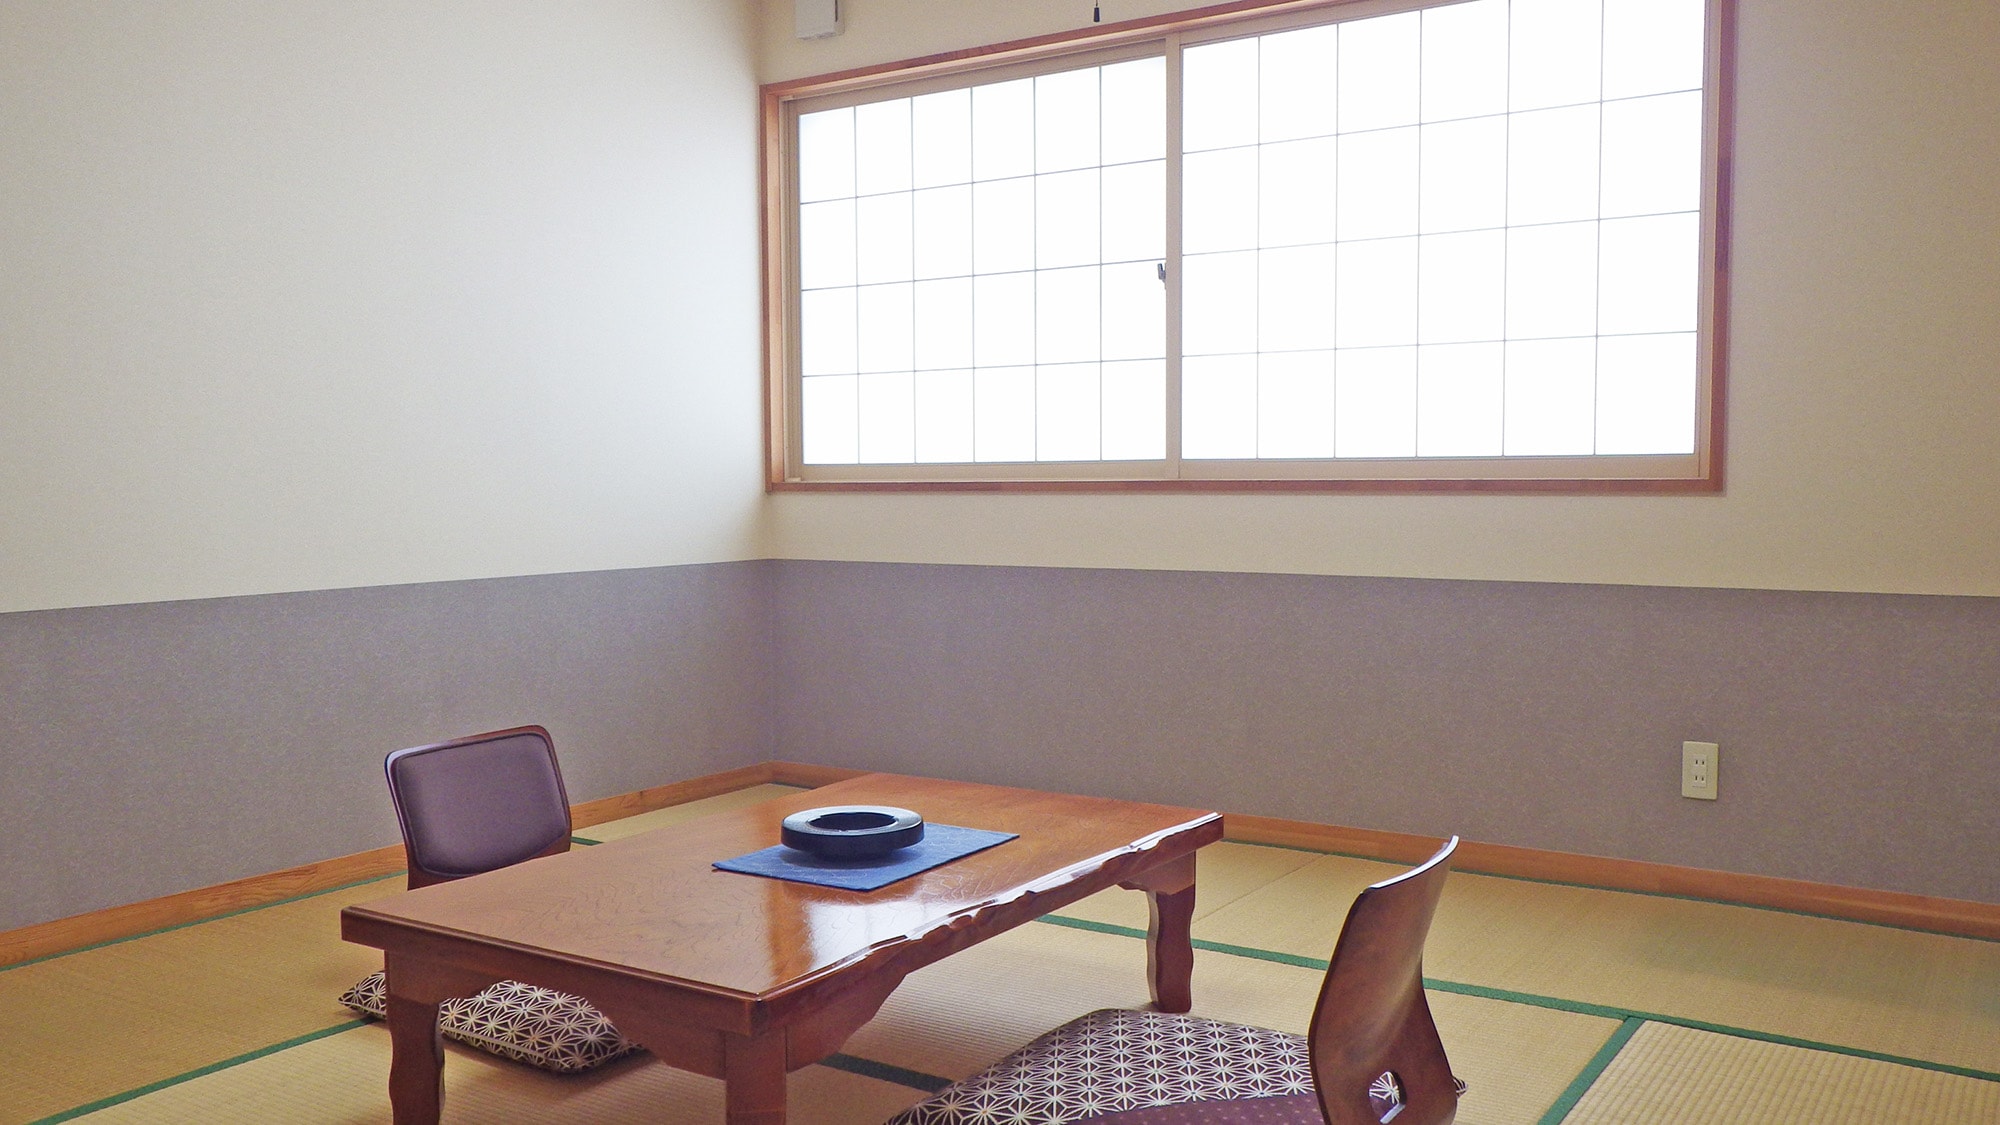 * Japanese-style room with 8 tatami mats / A simple tatami room with bright sunlight shining through the shoji window. Recommended for couples and couples.